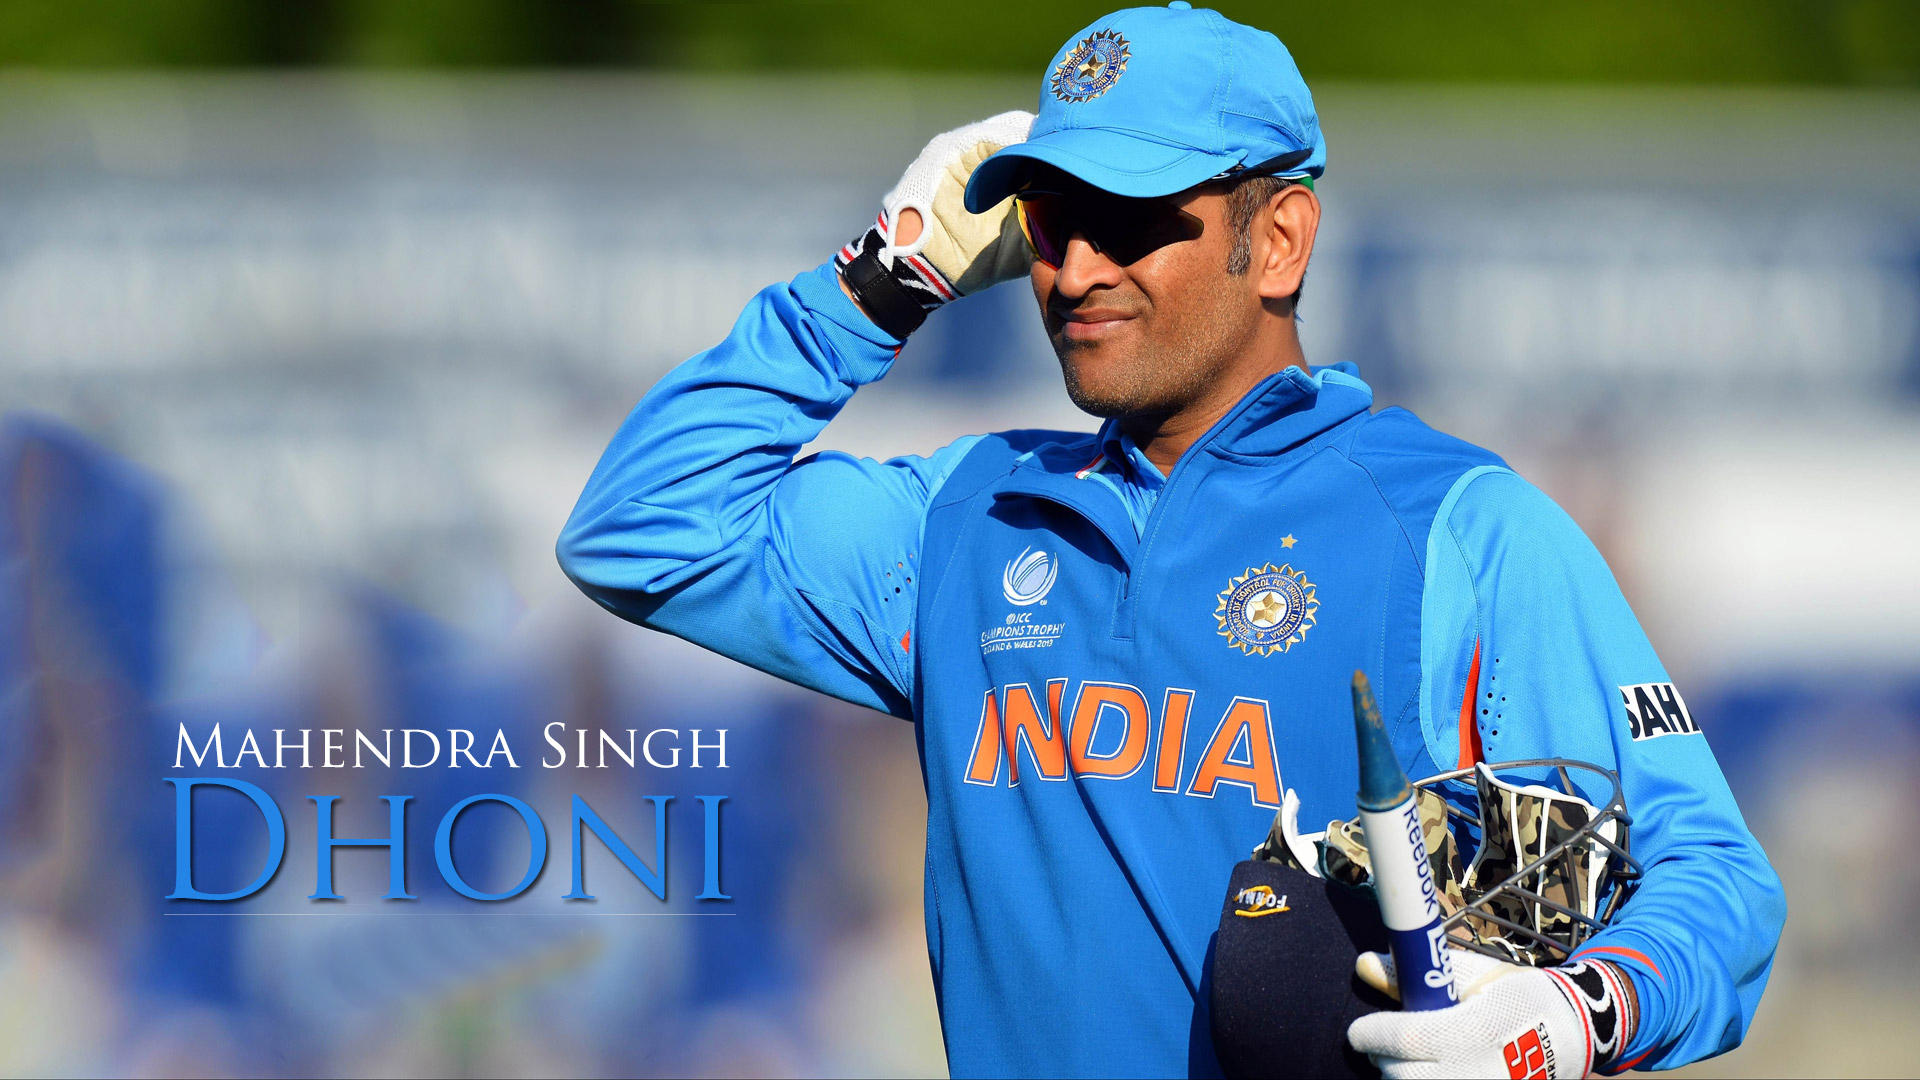 Dhoni Wallpapers High Resolution and Quality Download